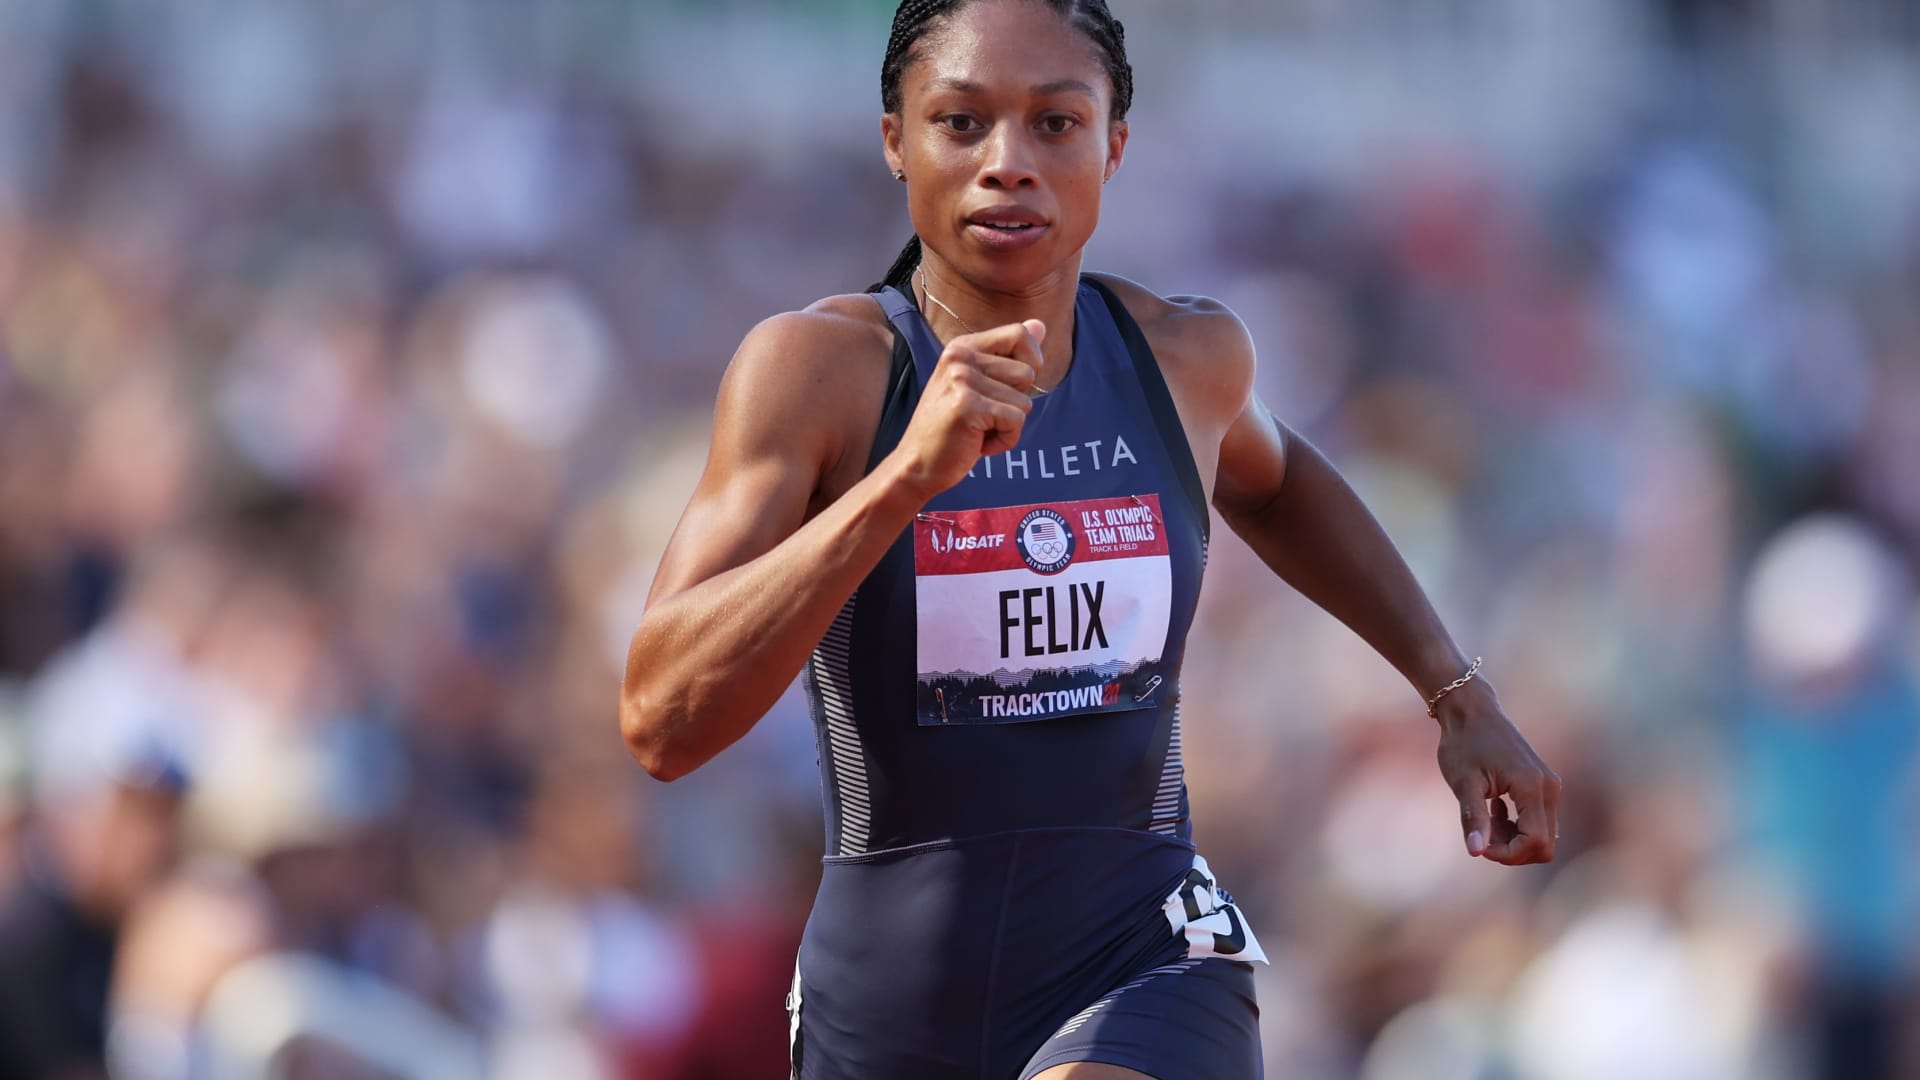 Allyson Felix competes in the Women' 200 Meters Semi-Finals during day eight of the 2020 U.S. Olympic Track & Field Team Trials.